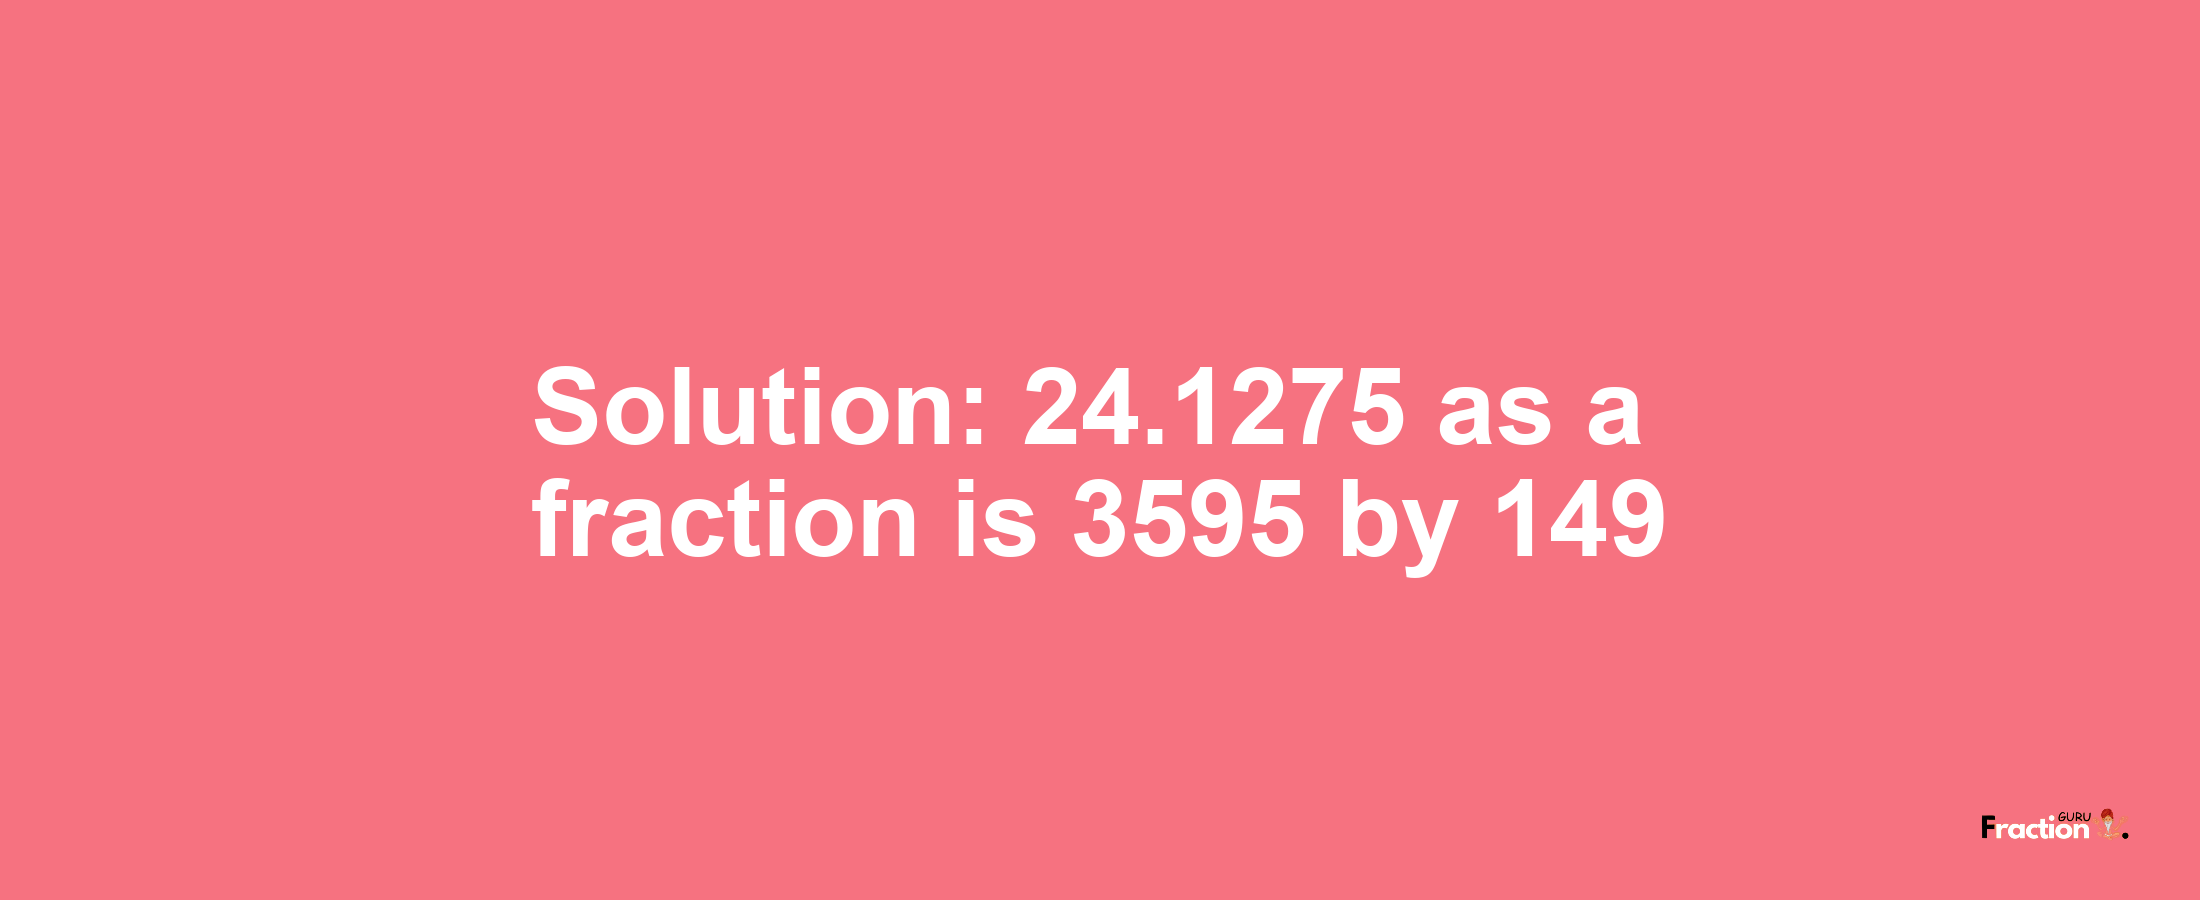 Solution:24.1275 as a fraction is 3595/149